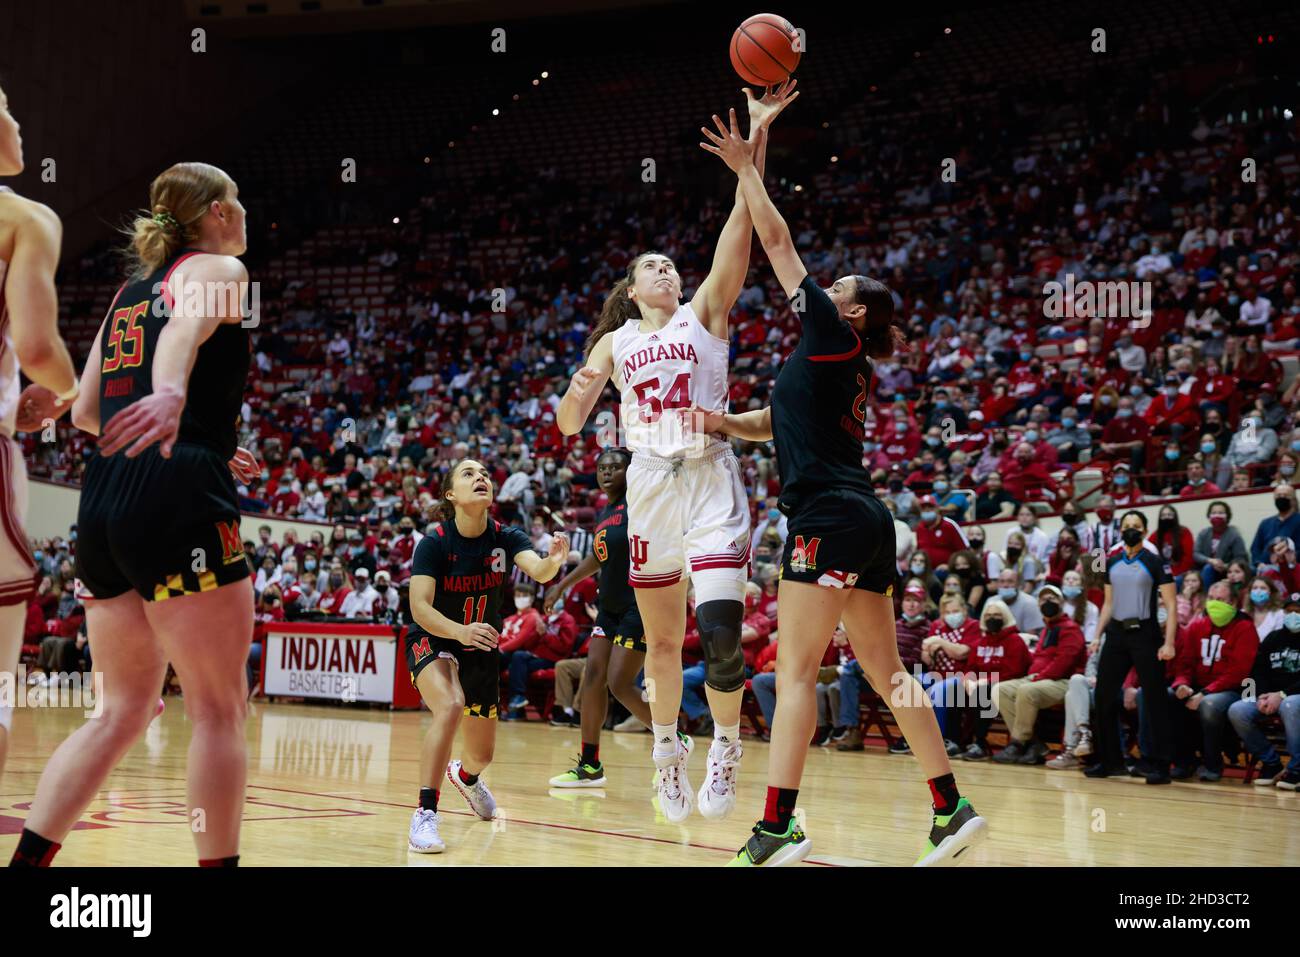 Bloomington, United States. 02nd Jan, 2022. Indiana Hoosiers forward Mackenzie Holmes (R2) shoots against Maryland Terrapins forward Mimi Collins (R) during the National Collegiate Athletic Association (NCAA) women's basketball game in Bloomington. Indiana University beat Maryland 70-63. Credit: SOPA Images Limited/Alamy Live News Stock Photo